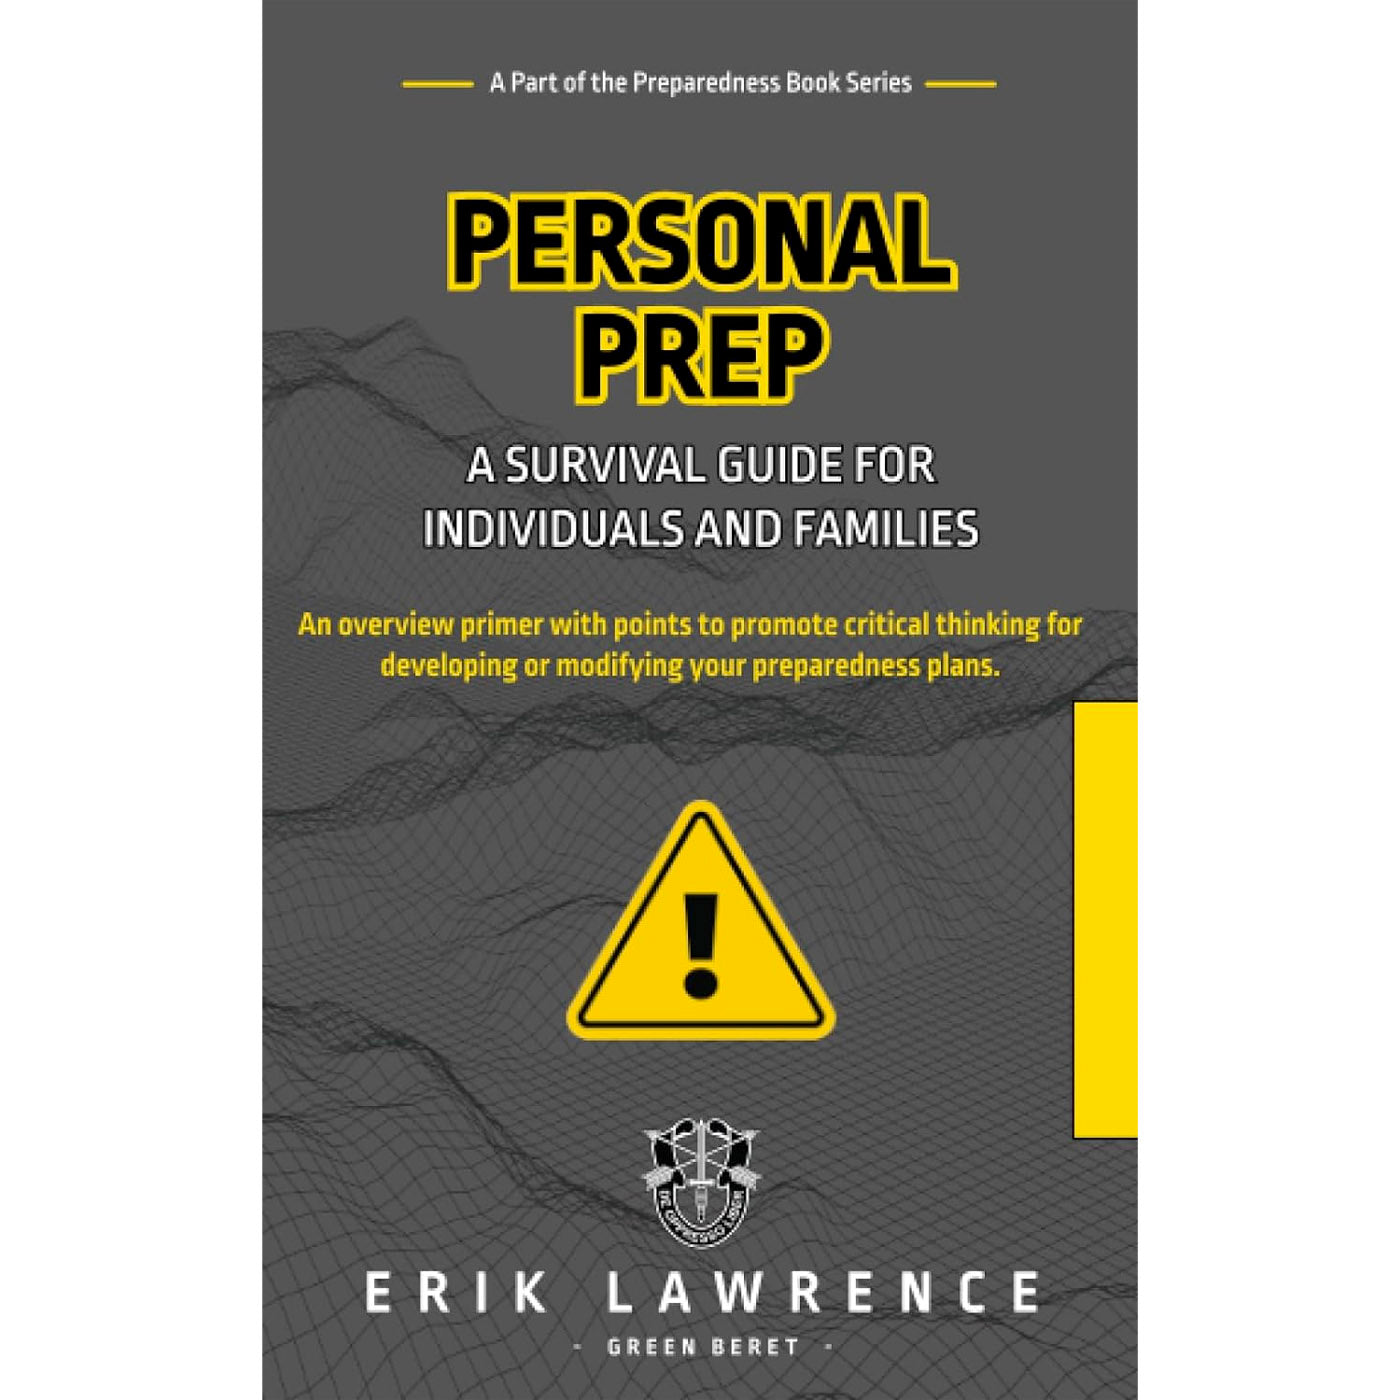 Personal Prep: A Survival Guide for Individuals and Families